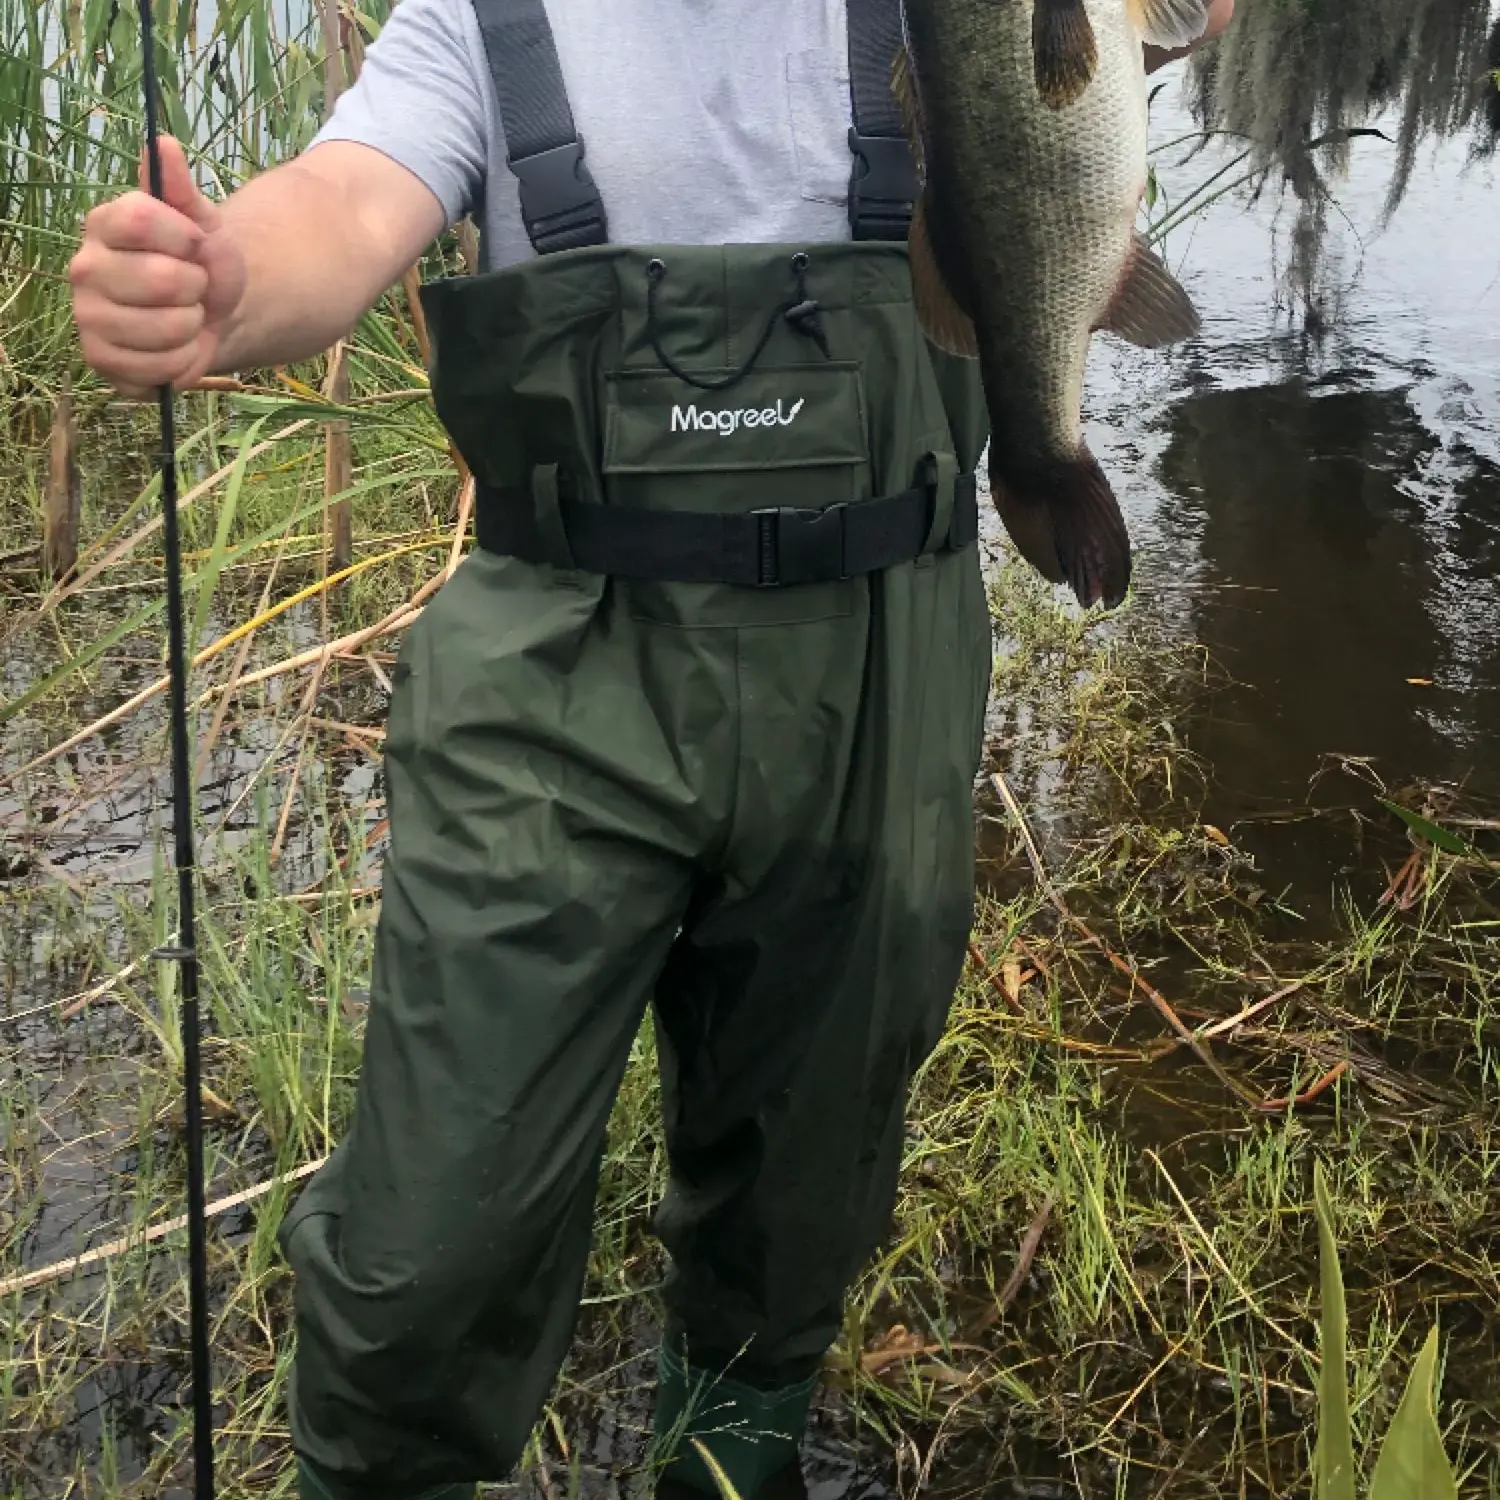 ᐅ Lake Link fishing reports🎣• Winter Haven, FL (United States